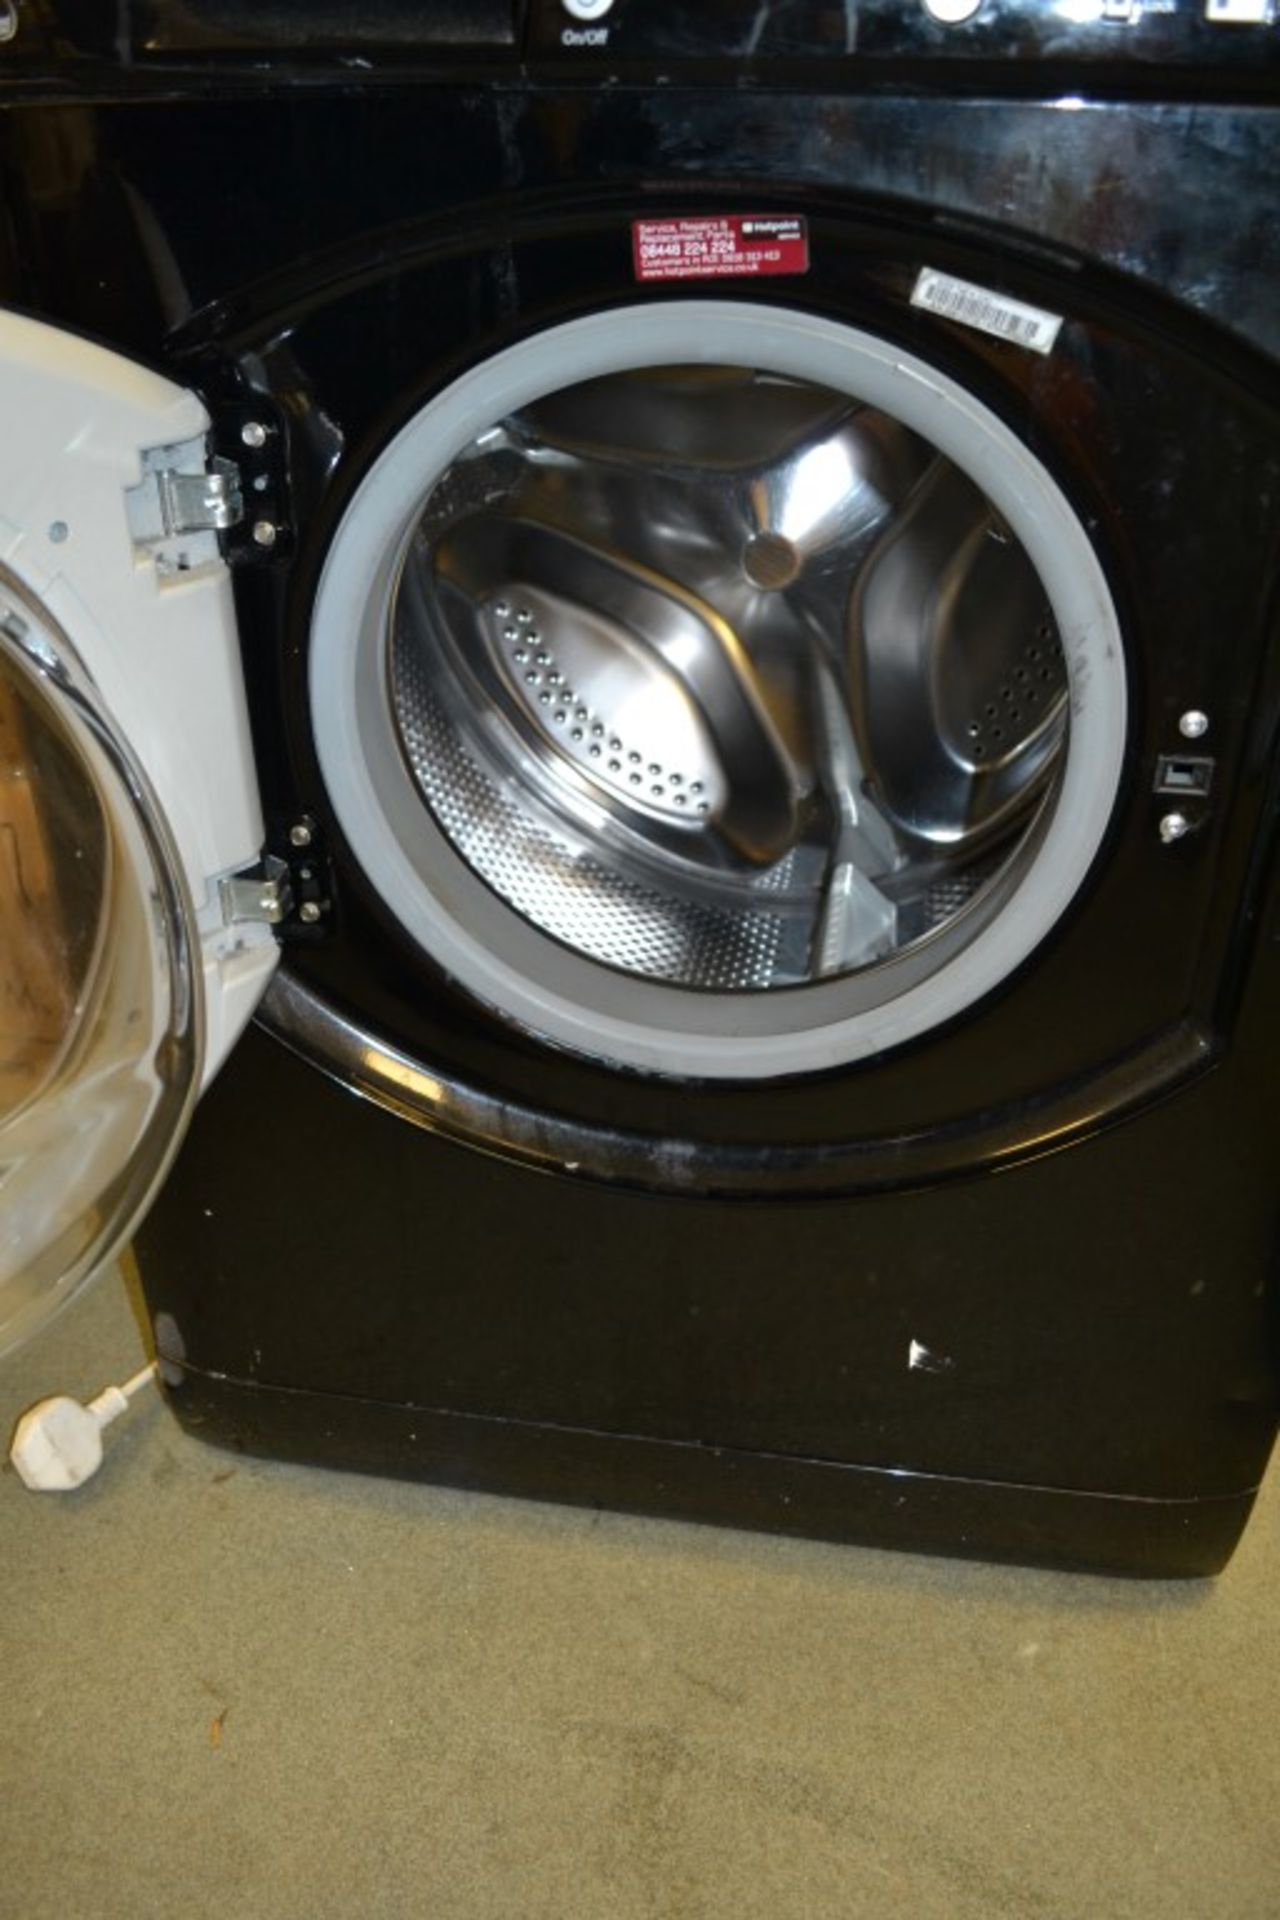 1 x Hotpoint Washing Machine (Model: WDF740 Aquarius) - 7kg Capacity - From A Clean Manor House - Image 4 of 6